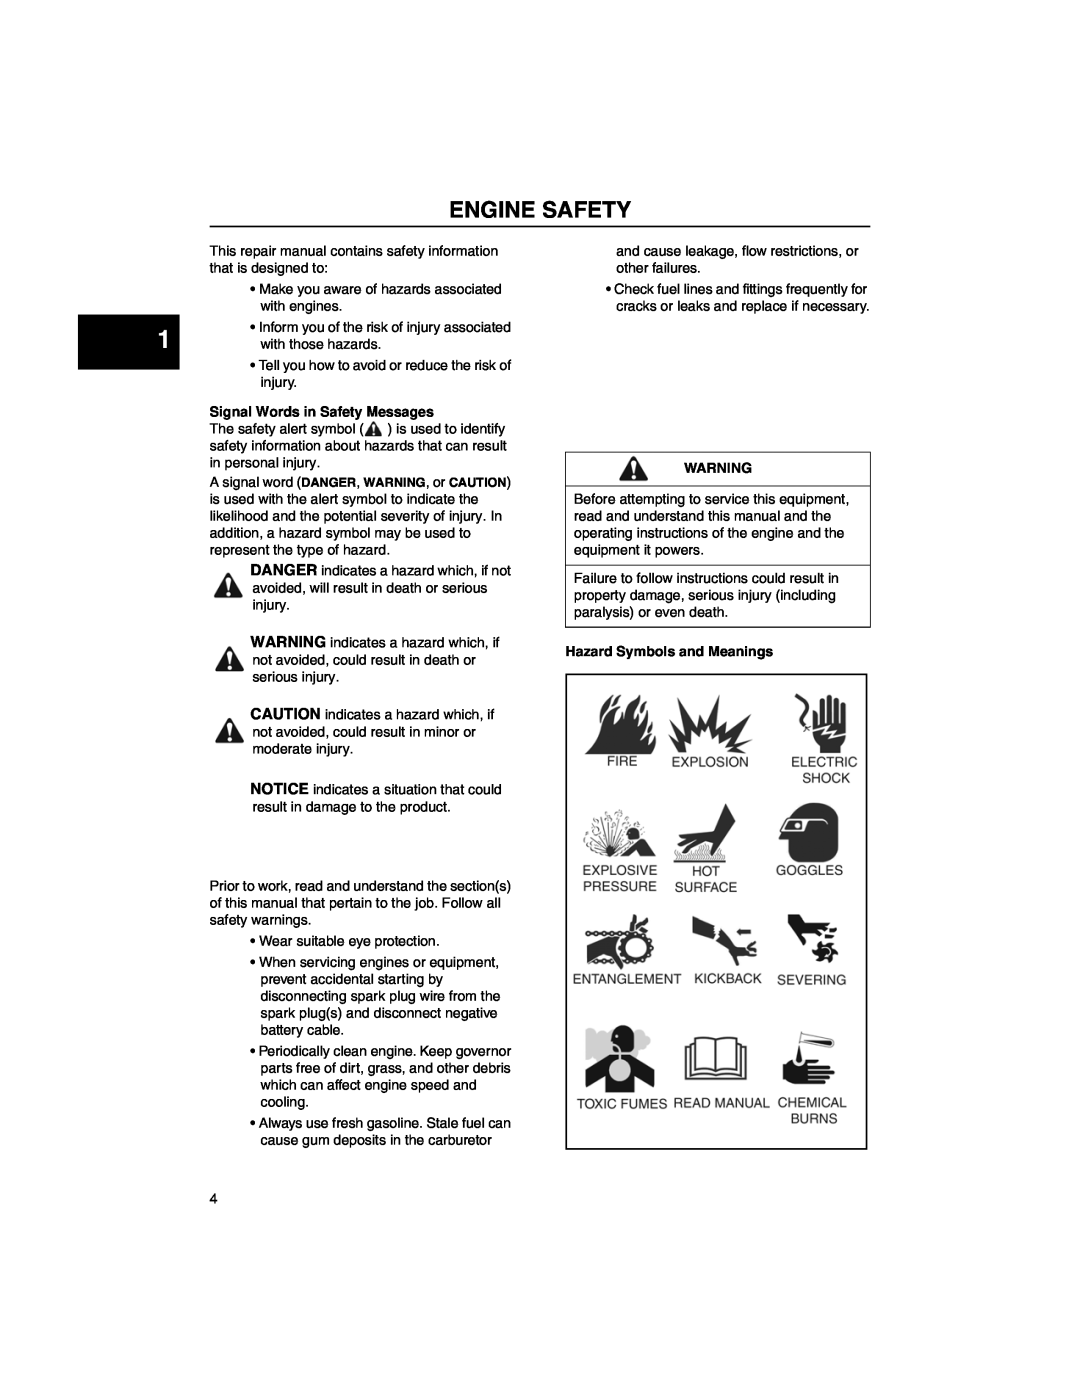 Briggs & Stratton CE8069, 271172, 270962, 276535 Engine Safety, Signal Words in Safety Messages, Hazard Symbols and Meanings 